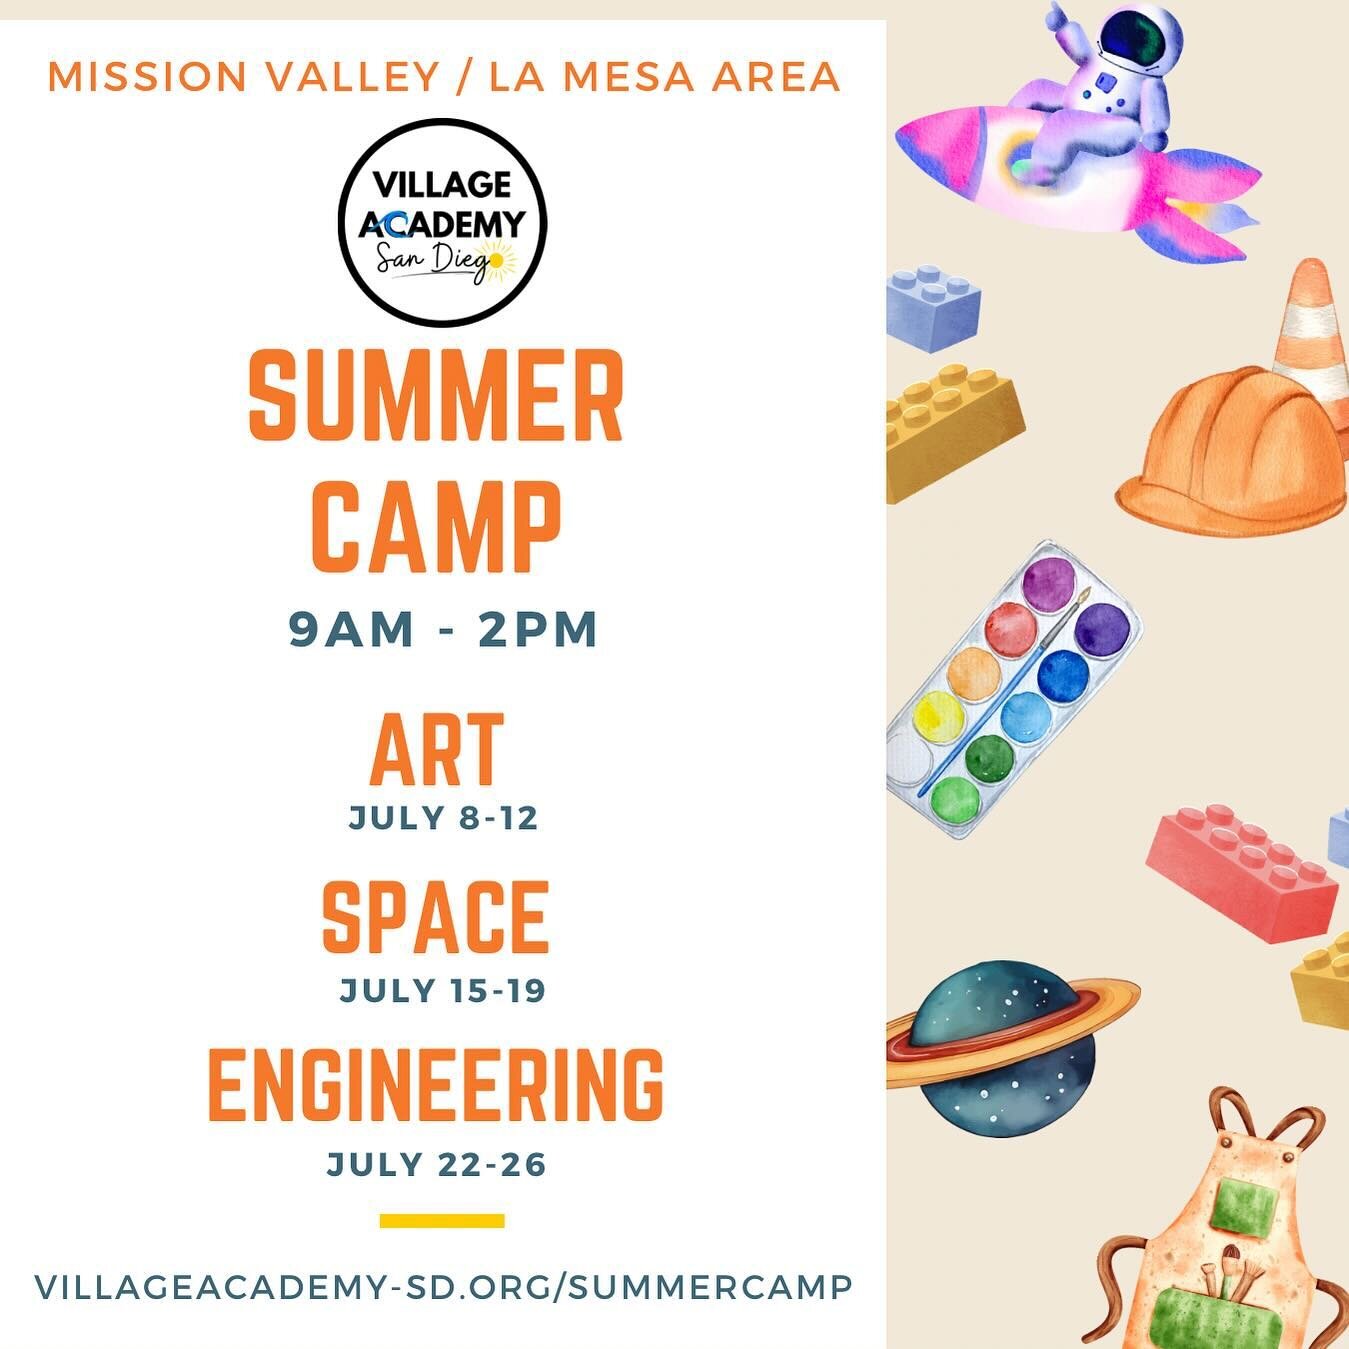 Summer is calling and adventure awaits! ☀️🌲 Introducing our exciting Summer Camp lineup - where creativity, innovation, and fun collide. 🎨🔧🌌

Enroll your explorer today at www.villageacademy-sd.org/summercamp or using the link in our bio!